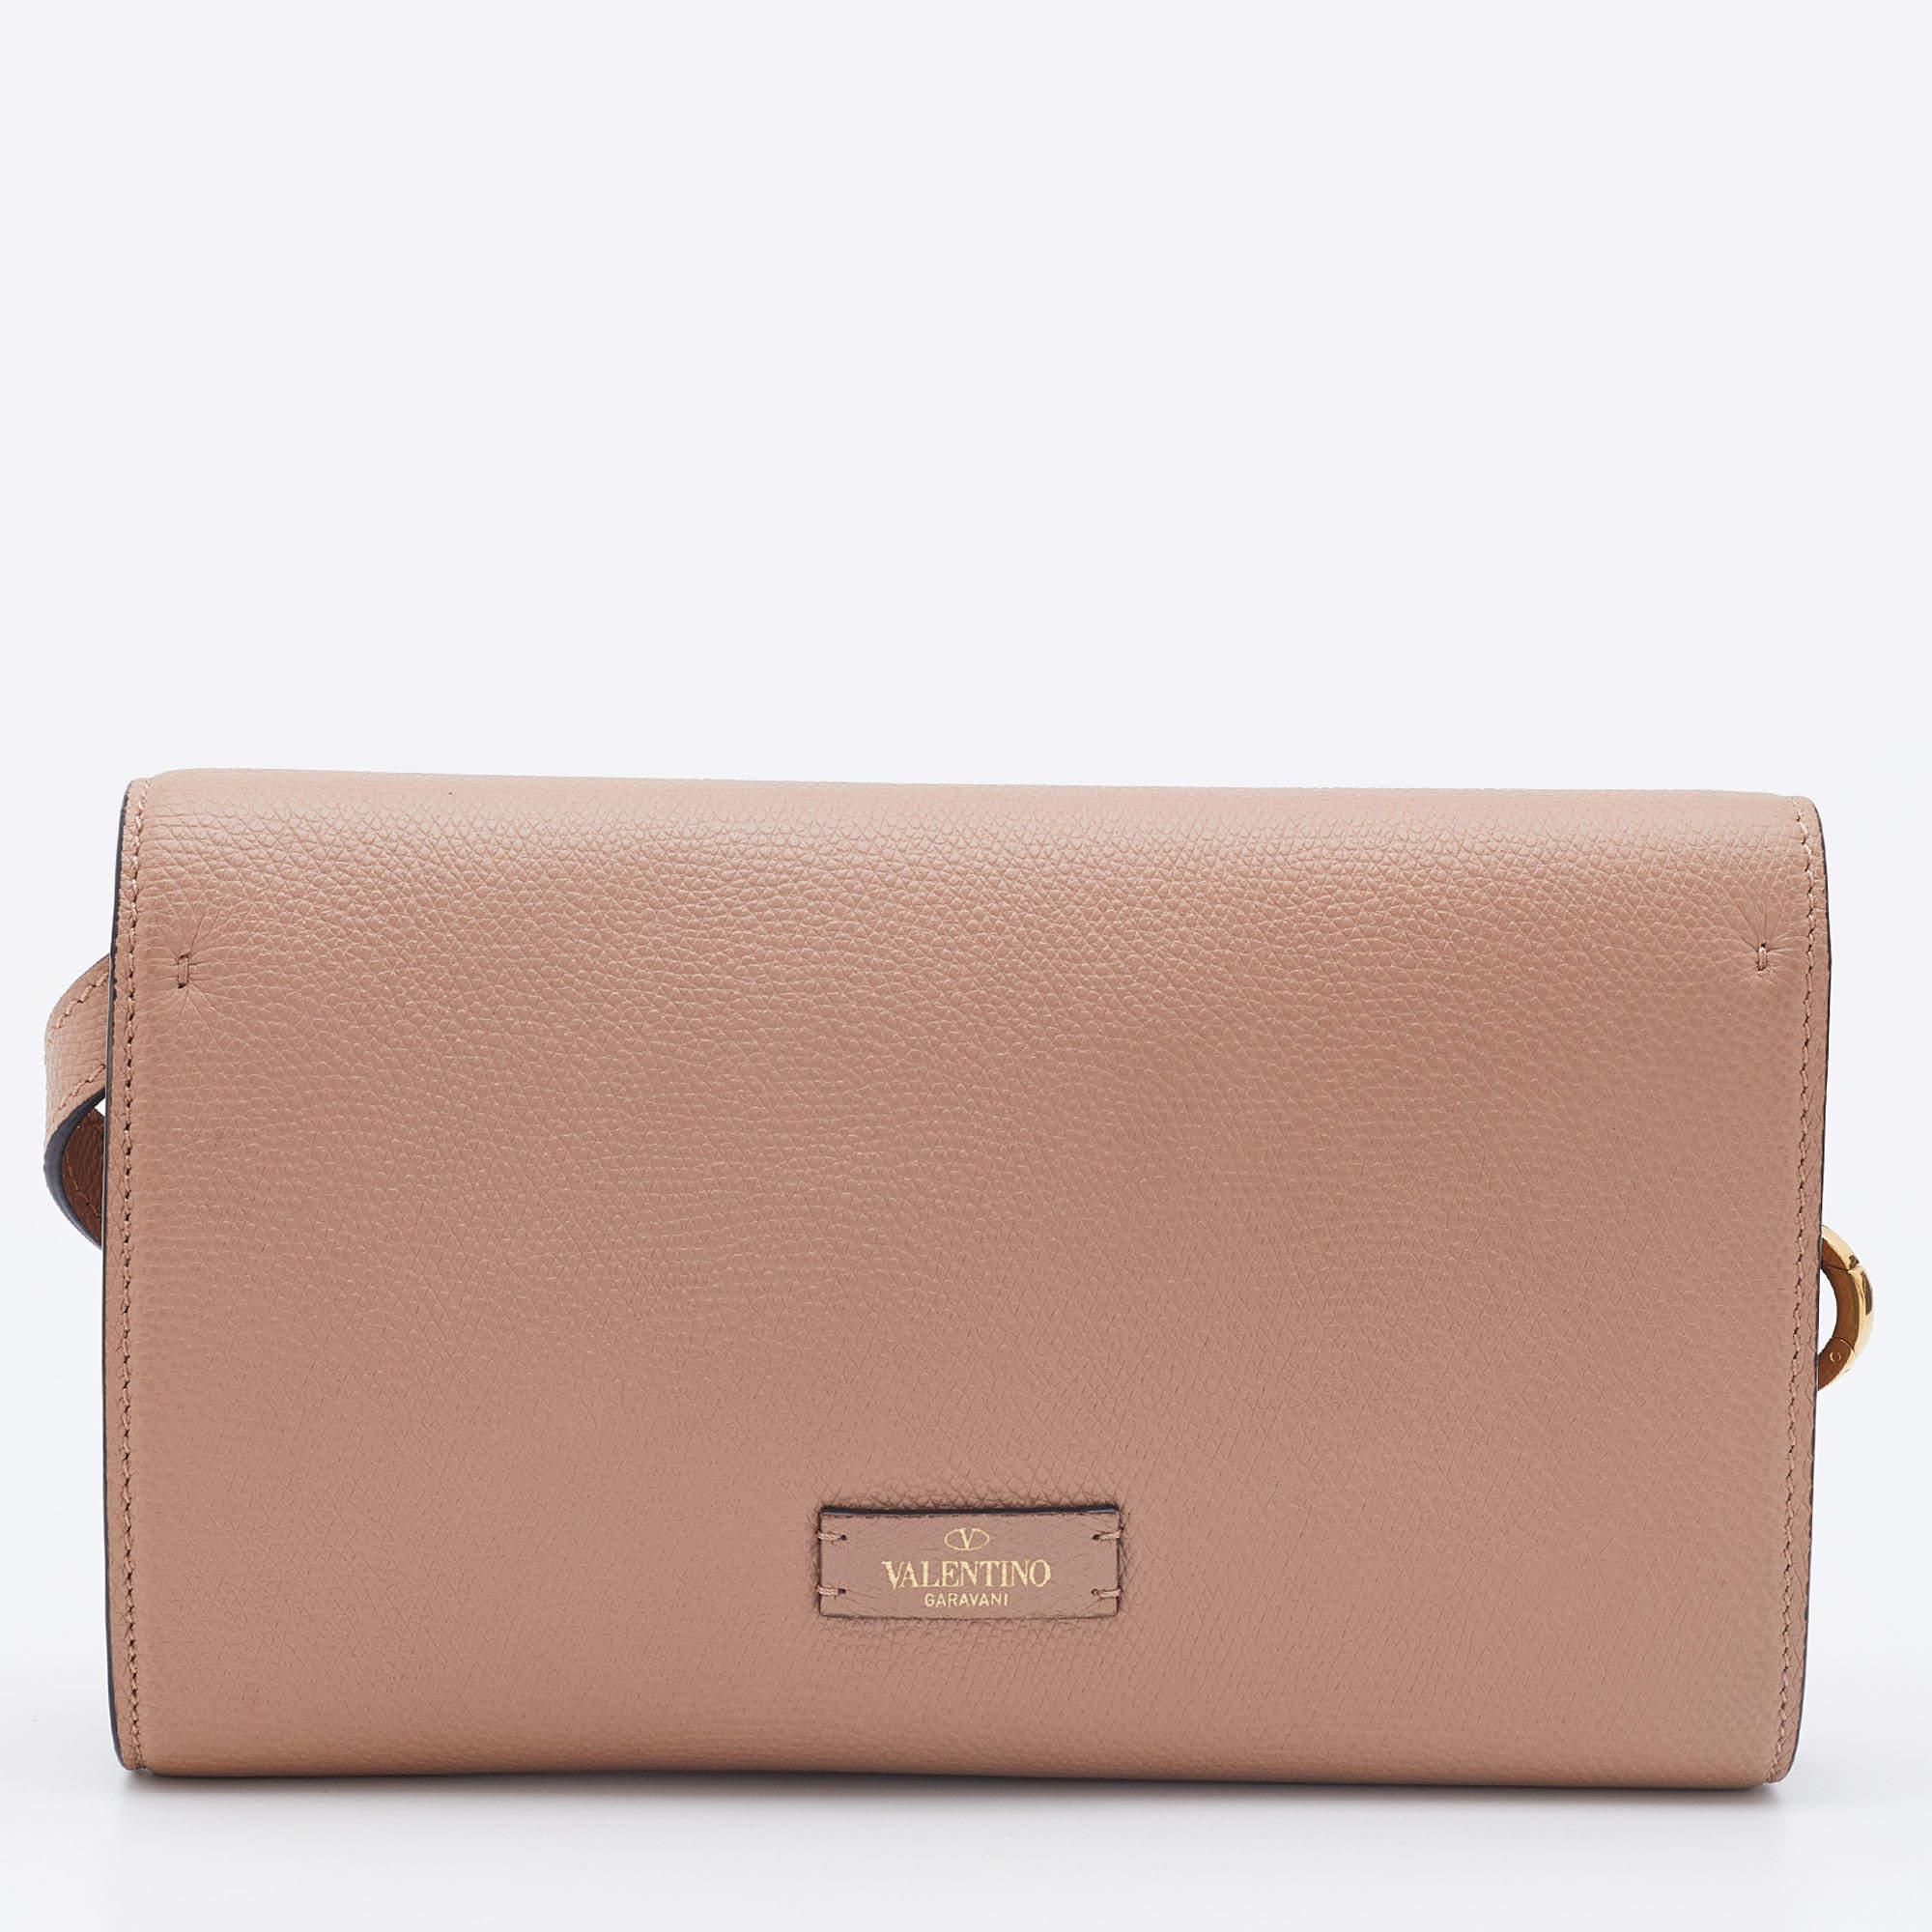 Valentino accessories are stylish, glamorous and classic. This Vsling by the iconic brand is perfect for a host of occasions and will make every outfit a success. Crafted from beige-hued leather, it has a sleek body with a front flap that carries